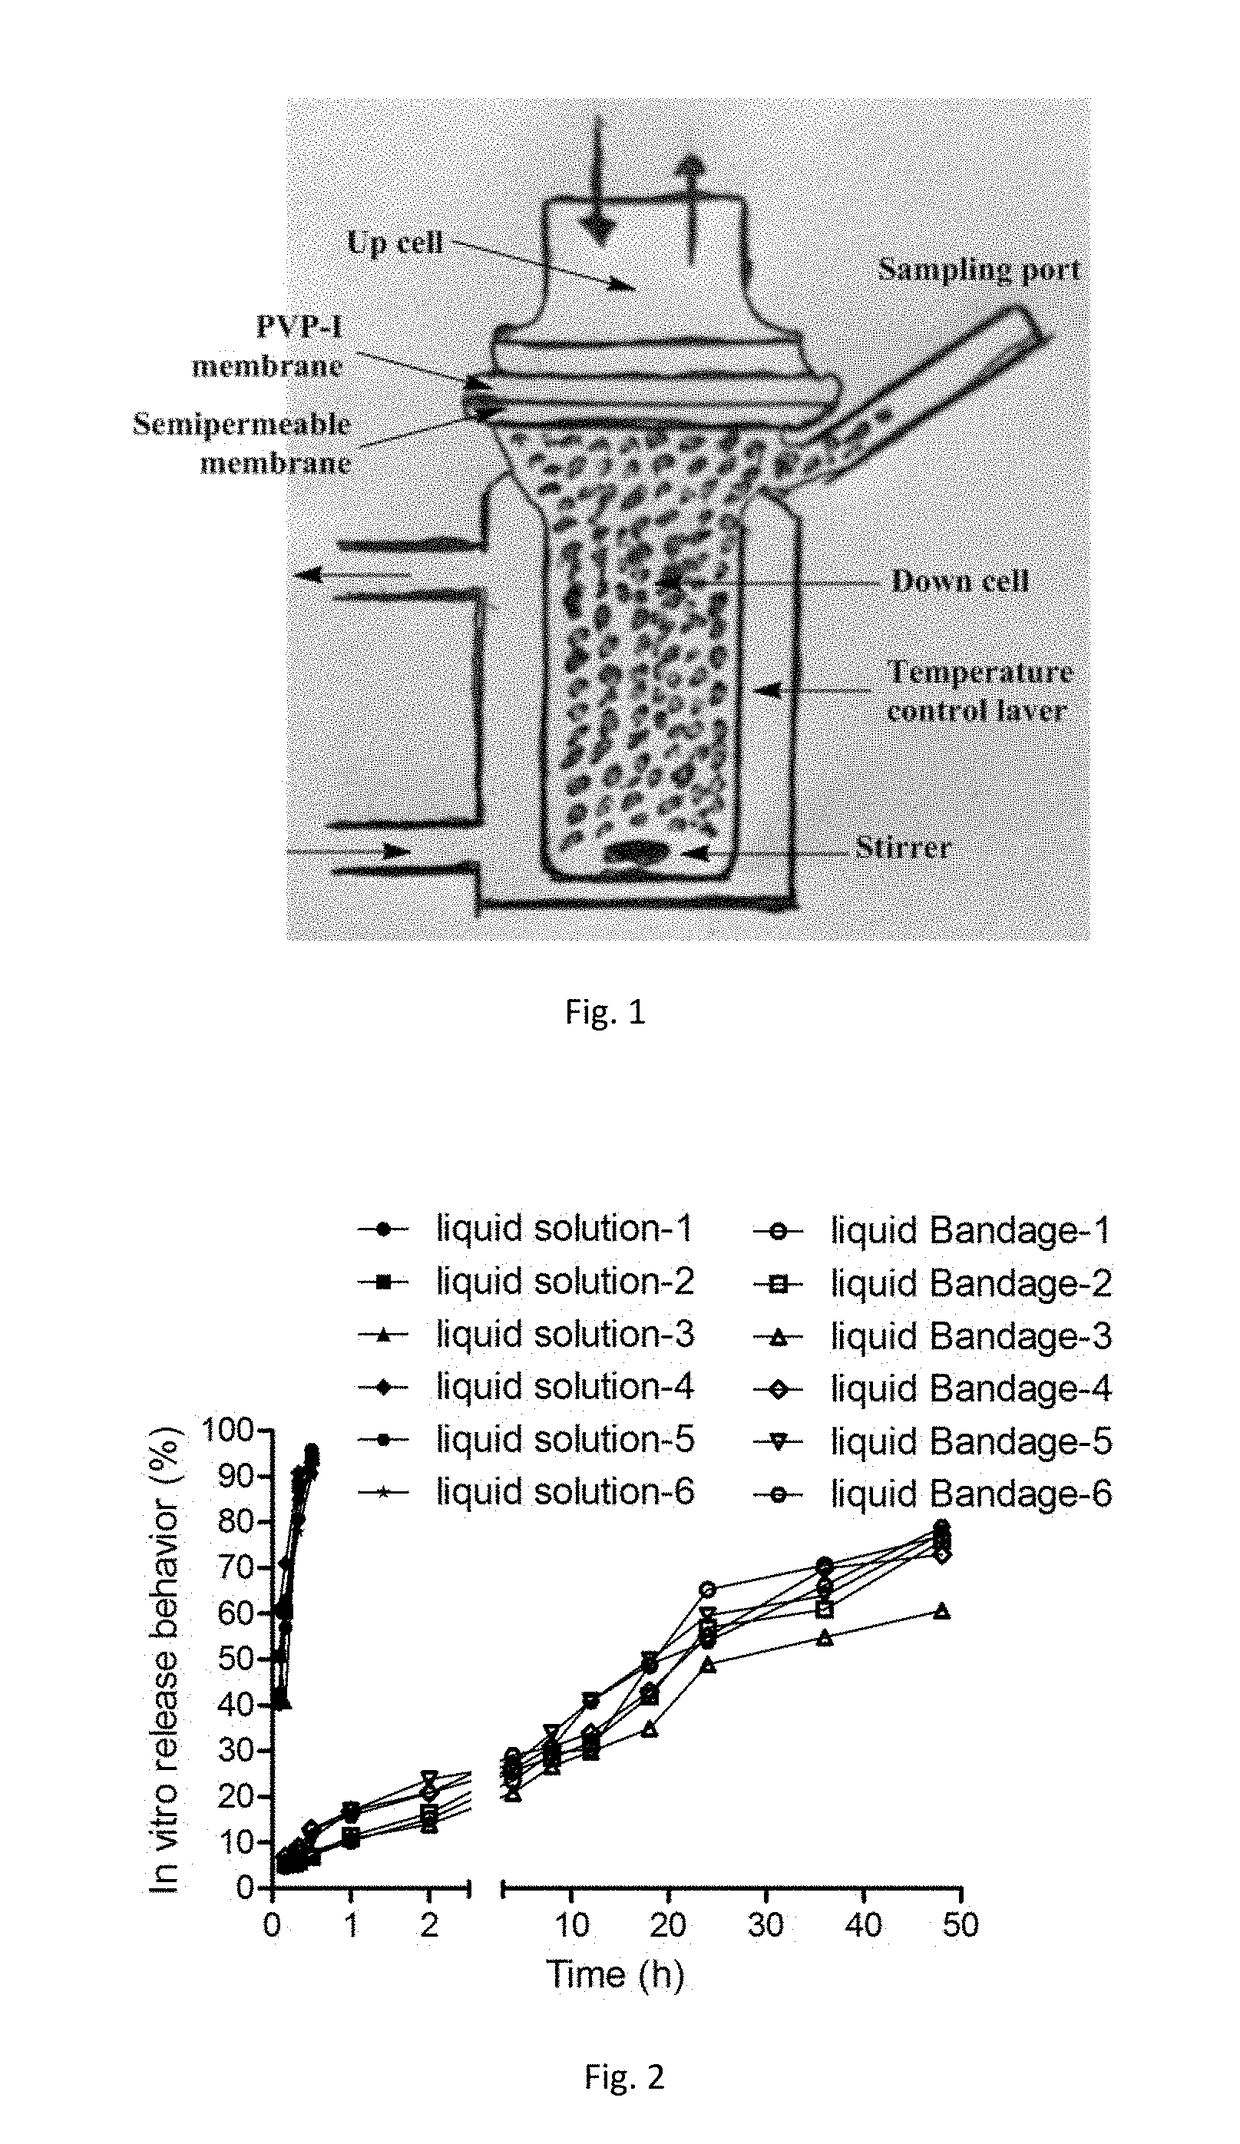 Novel rapid-deposition thin-film forming compositions as effective wound care treatment